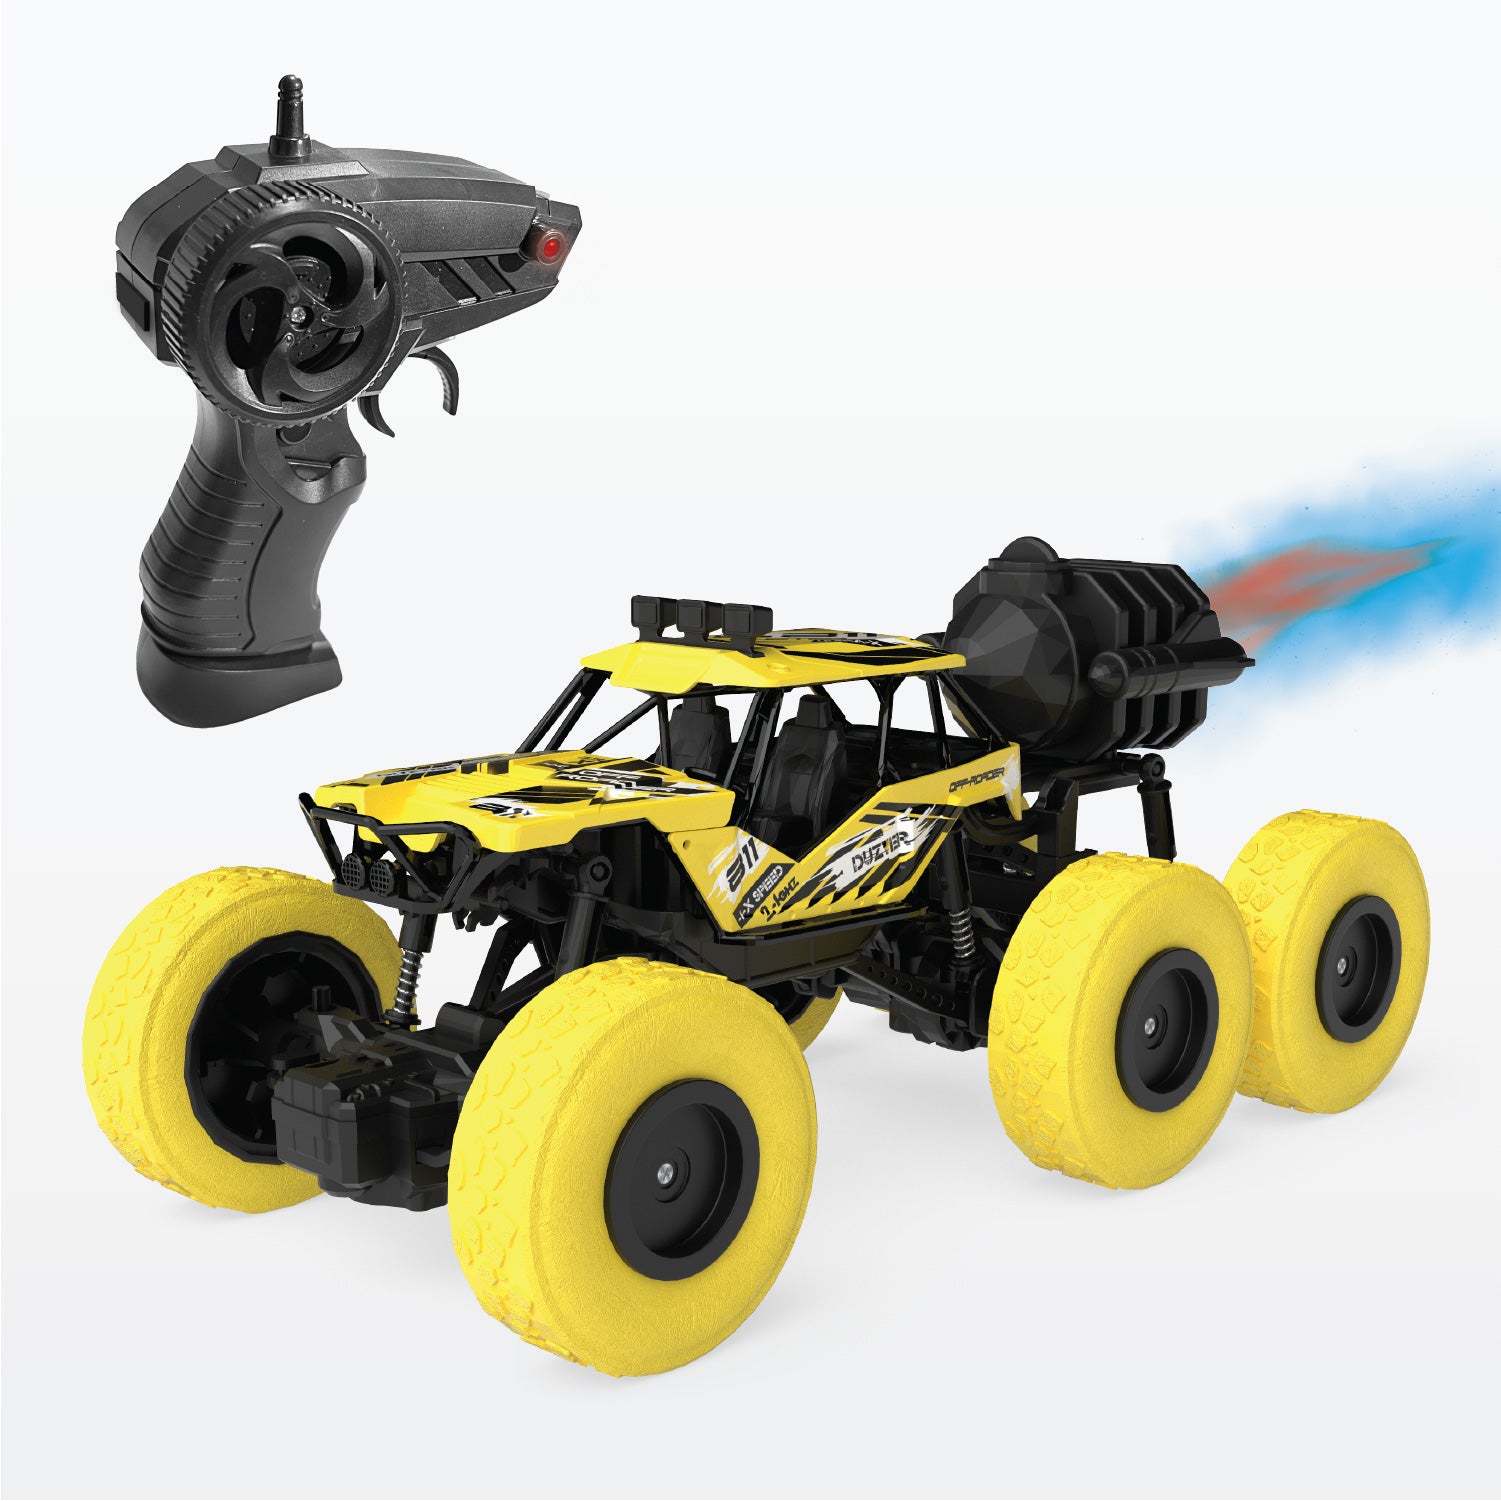 DUZTER - Smoker 6.0 THE OFF ROADER - RC Car with Rechargeable Battery - Yellow